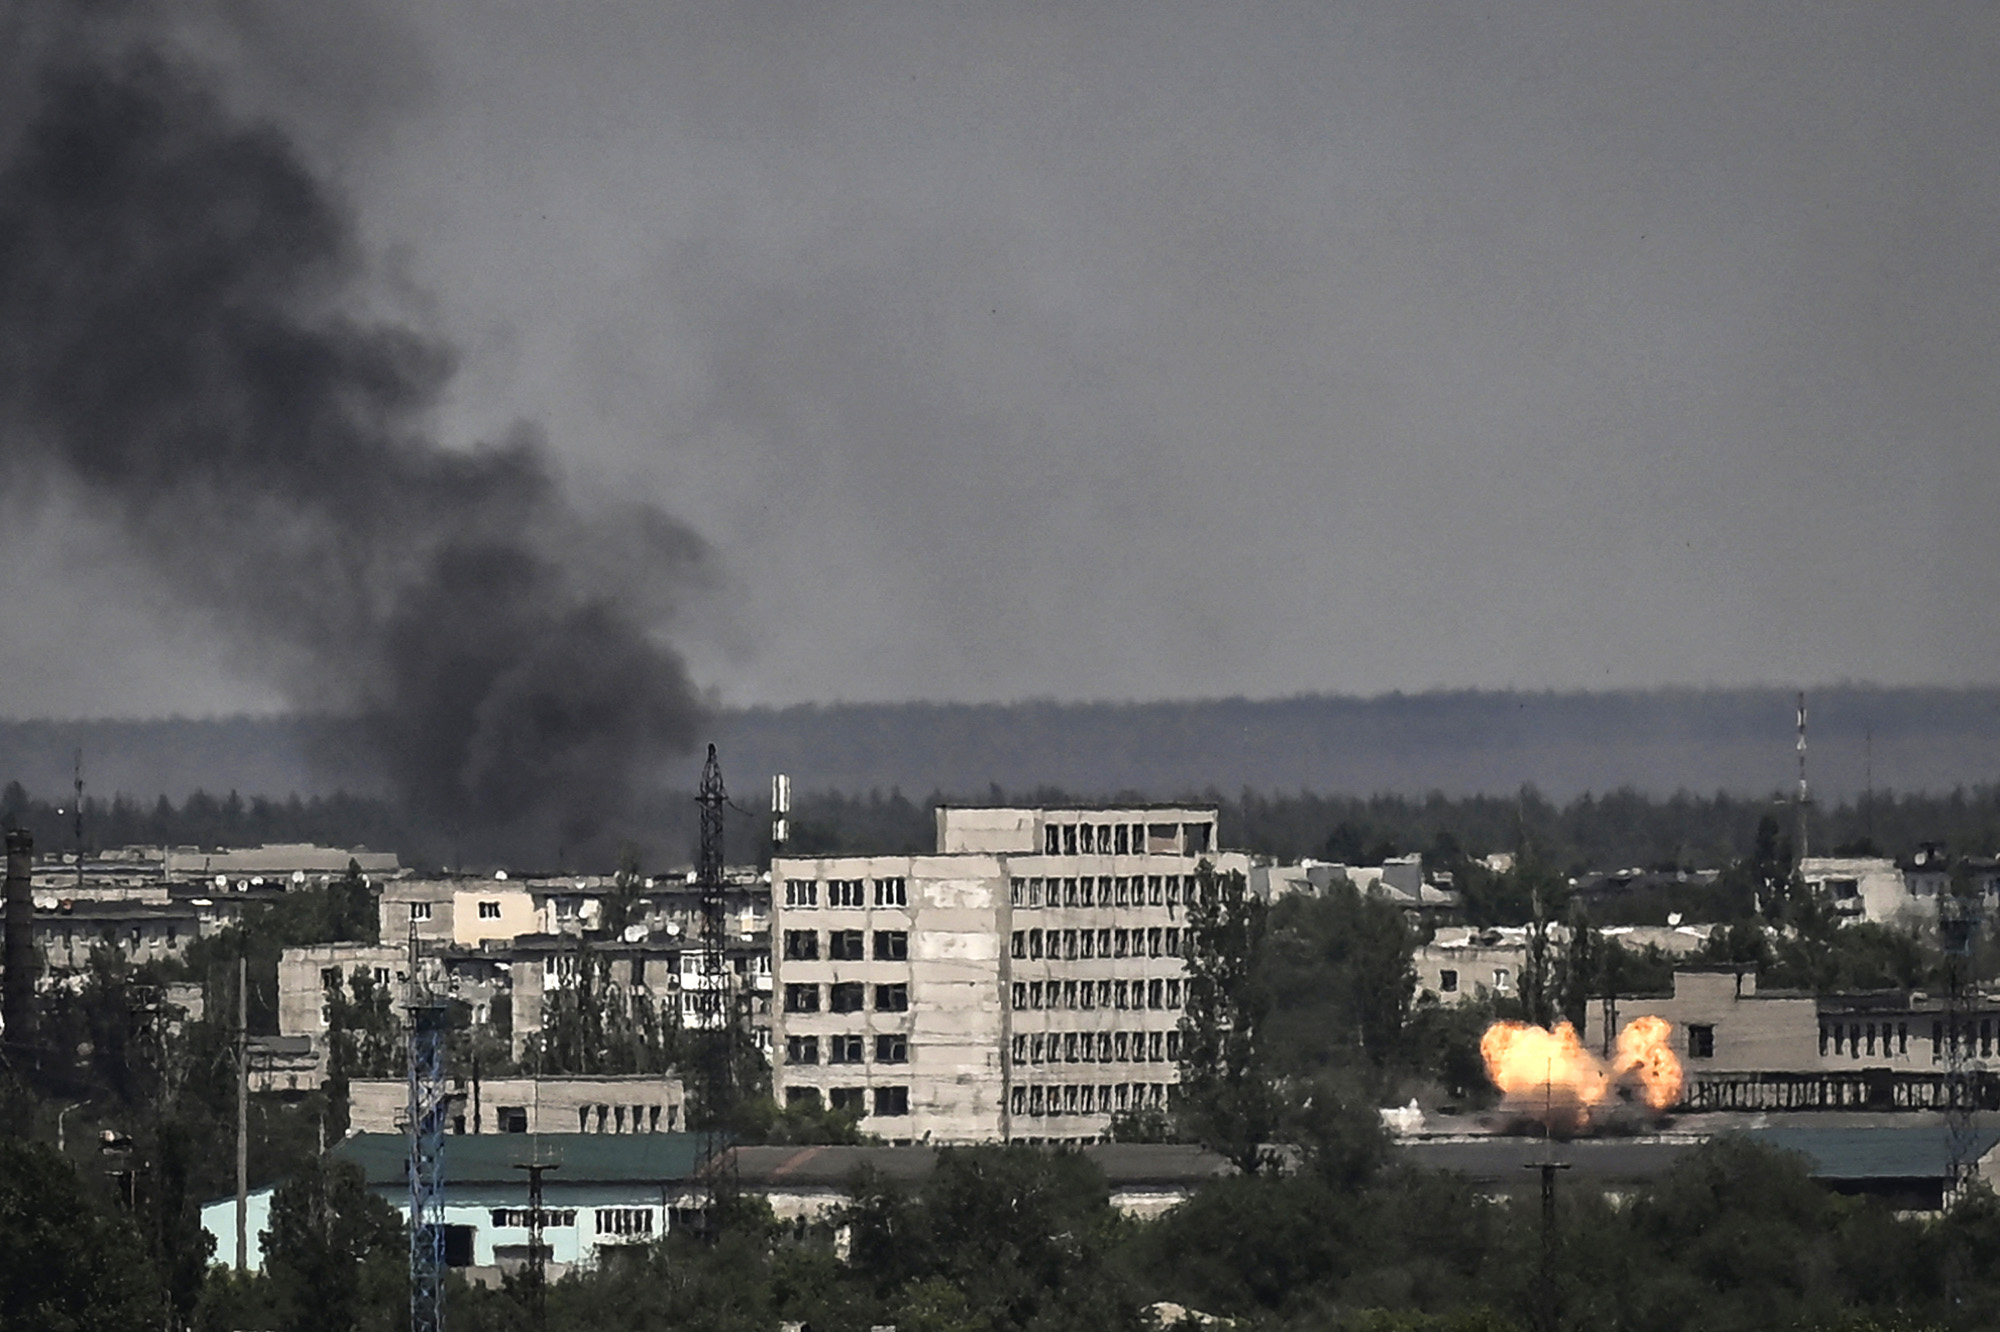 Smoke rises in the city of Severodonetsk, Ukraine during heavy fighting on May 30.